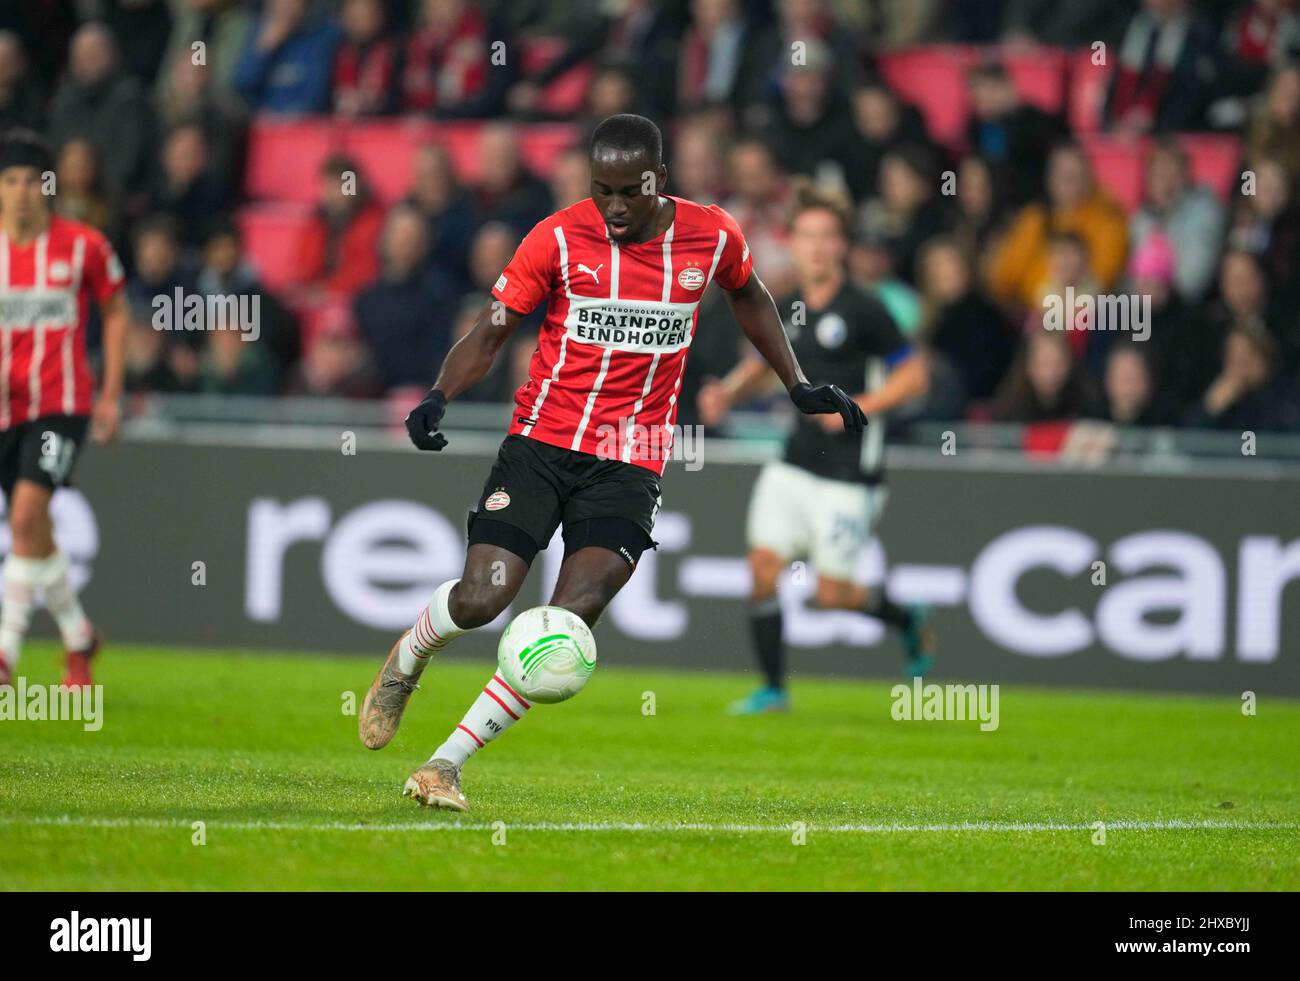 Philips Stadium, Eindhoven, Netherlands. 10th Mar, 2022. Jordan Teze of PSV Eindhoven controls the ball during PSV Eindhoven v FC KÃ¸benhavn, at Philips Stadium, Eindhoven, Netherlands. Kim Price/CSM/Alamy Live News Stock Photo